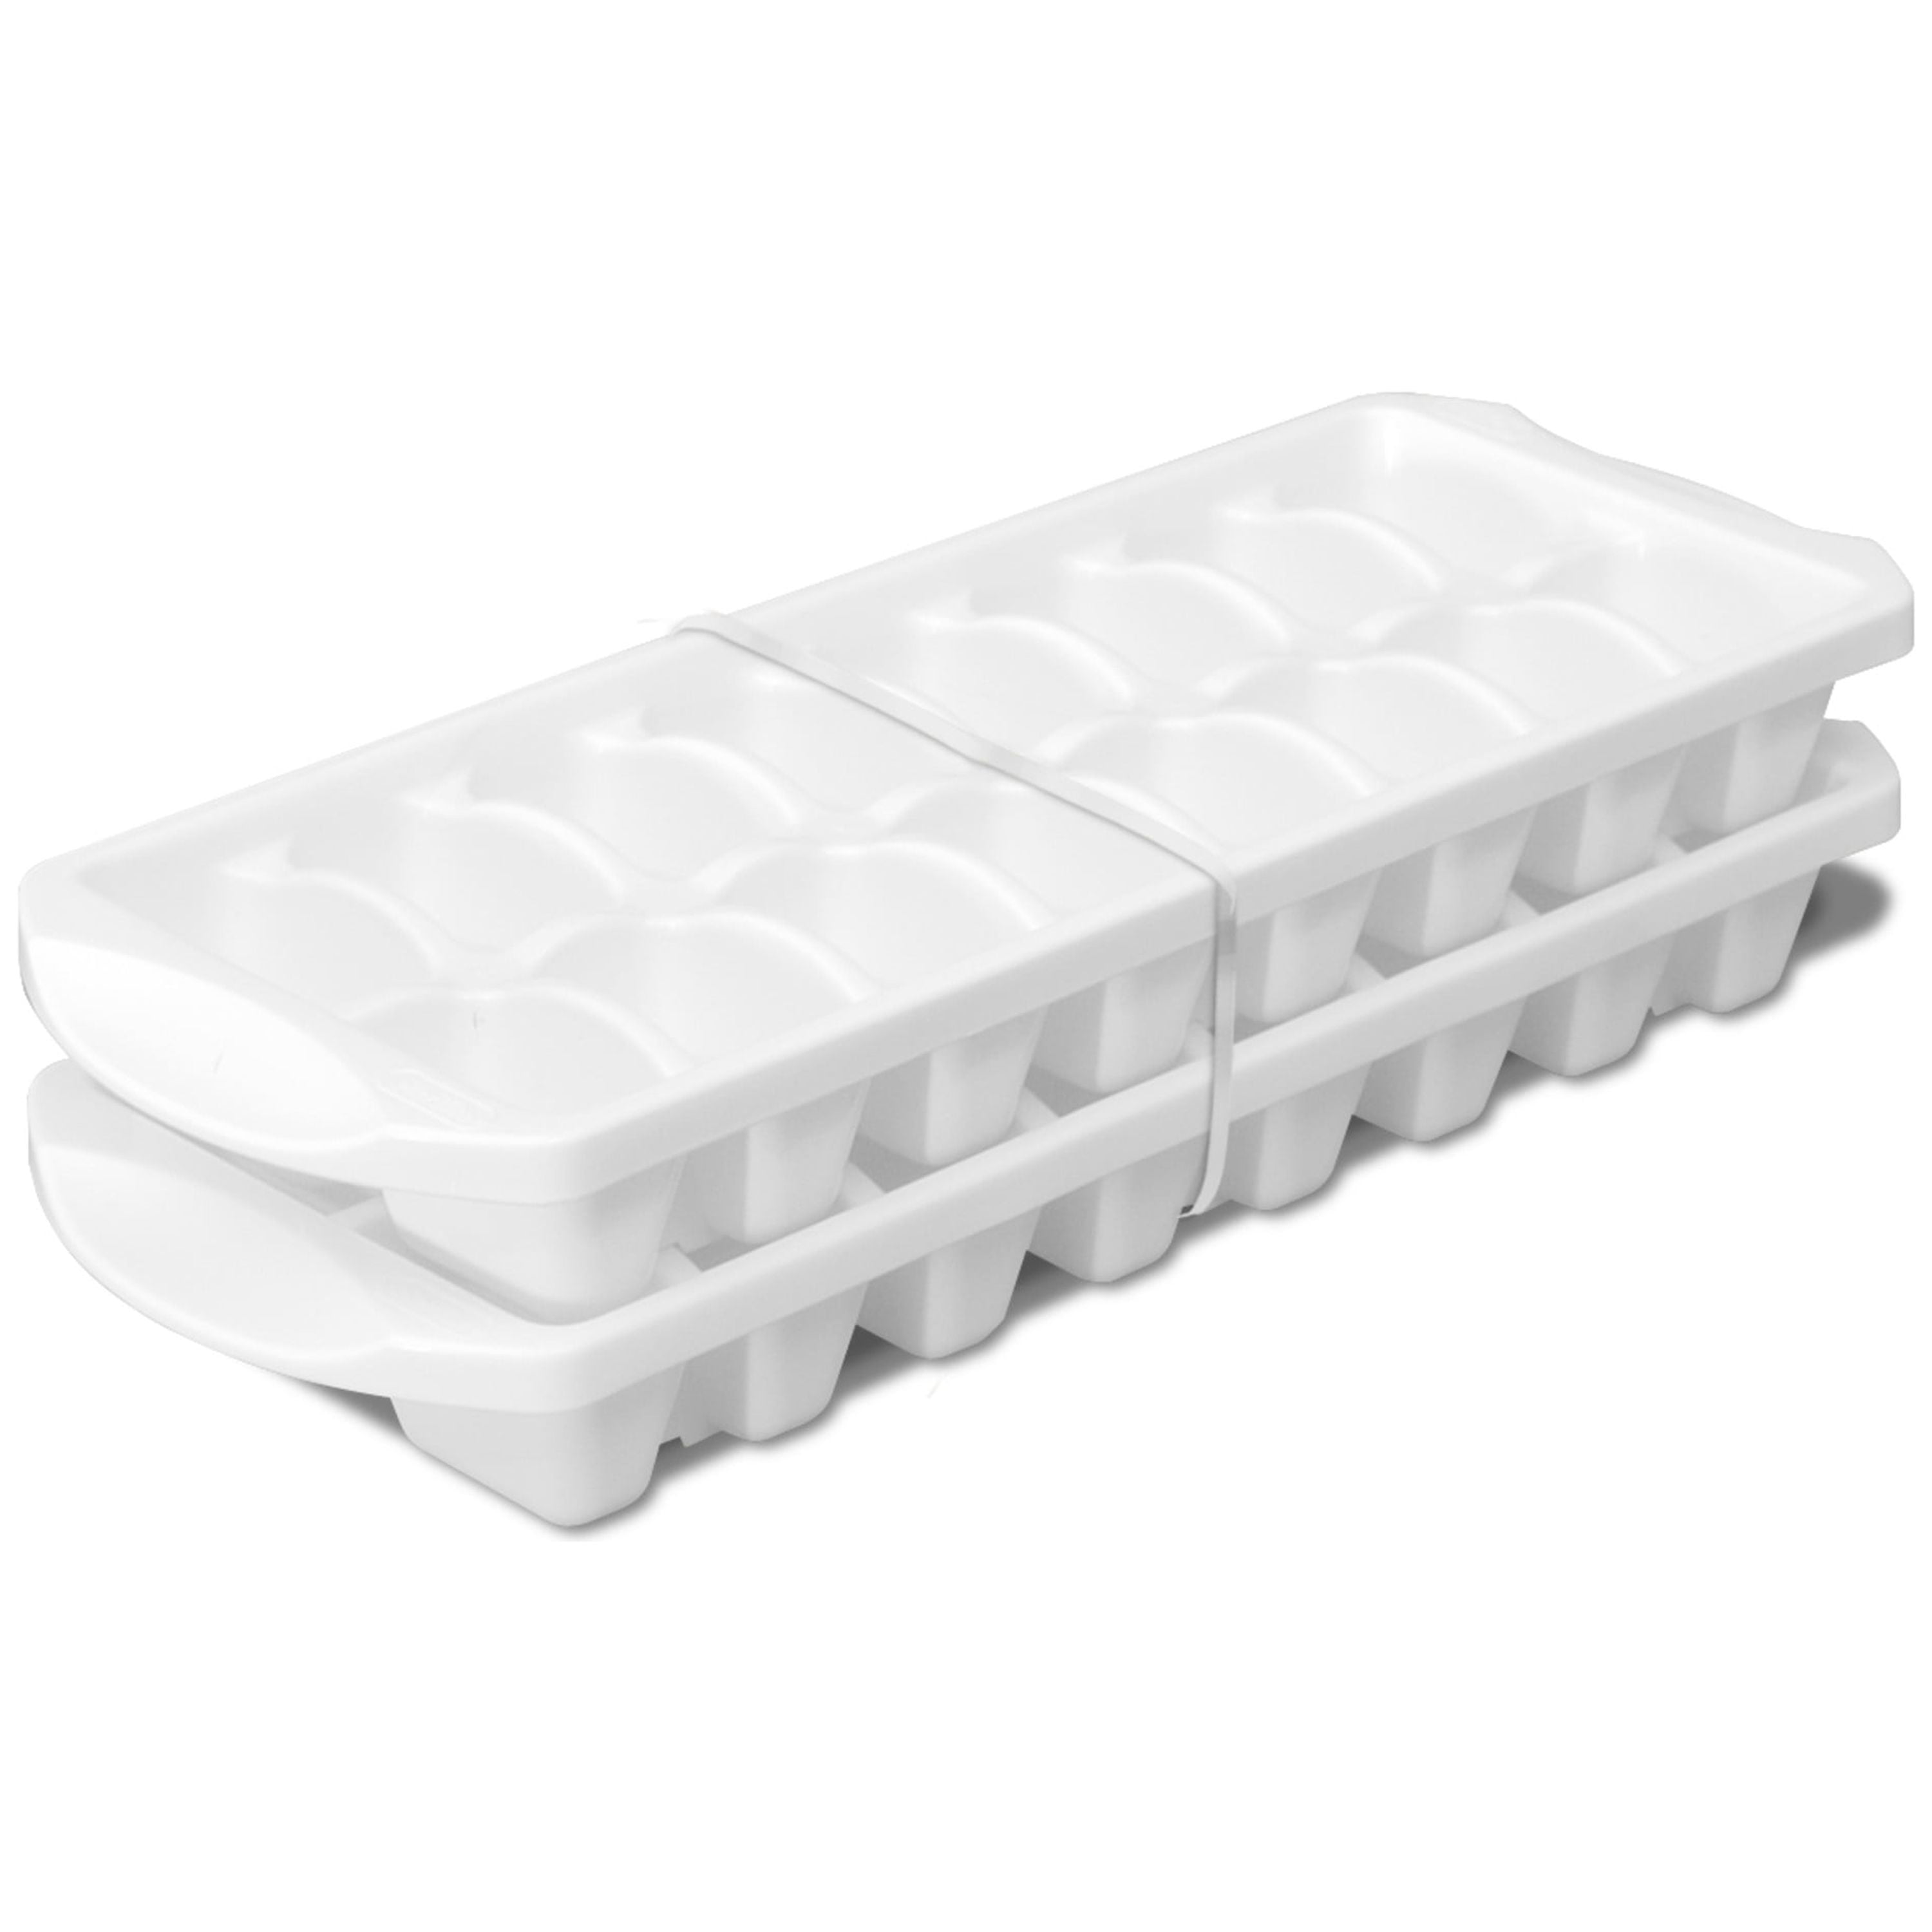  Bangp 1-Cup Silicone Freezing Tray with Lid,2 Pack